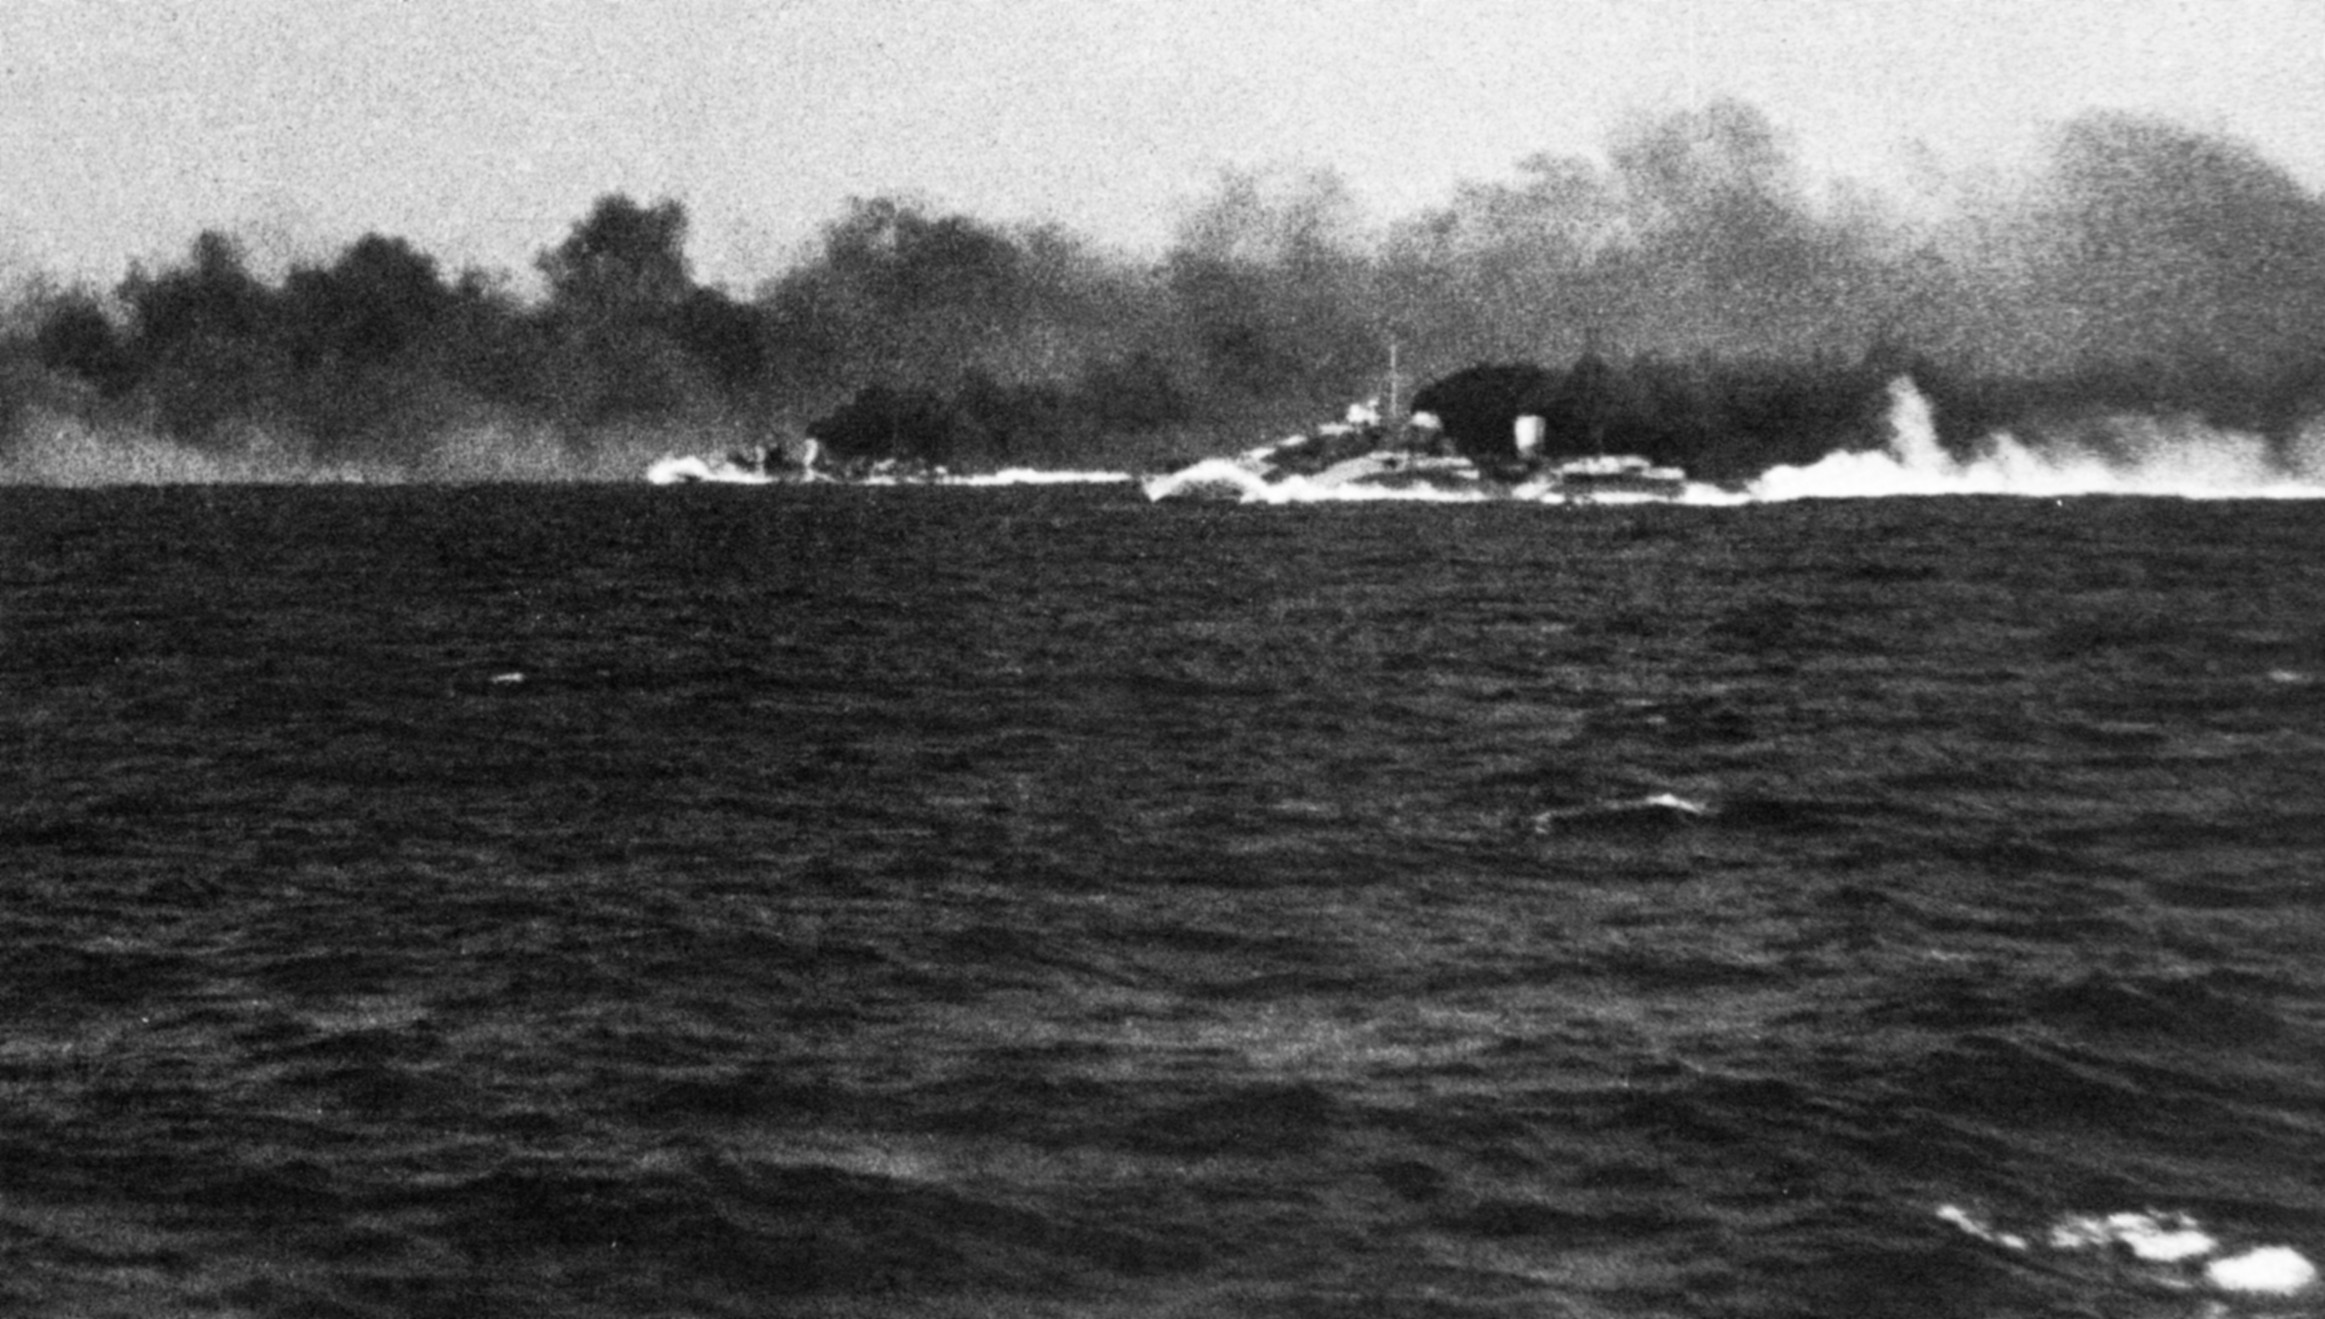 Prior to coming under attack itself, the British cruiser HMS Gloucester was unable to take advantage of a protective smokescreen seen belching in black and white clouds from the cruisers HMS Ajax and HMAS Perth.  In this photograph taken from the deck of the Gloucester, the other British warships are being fired upon by the Italian battleship Vittorio Veneto.